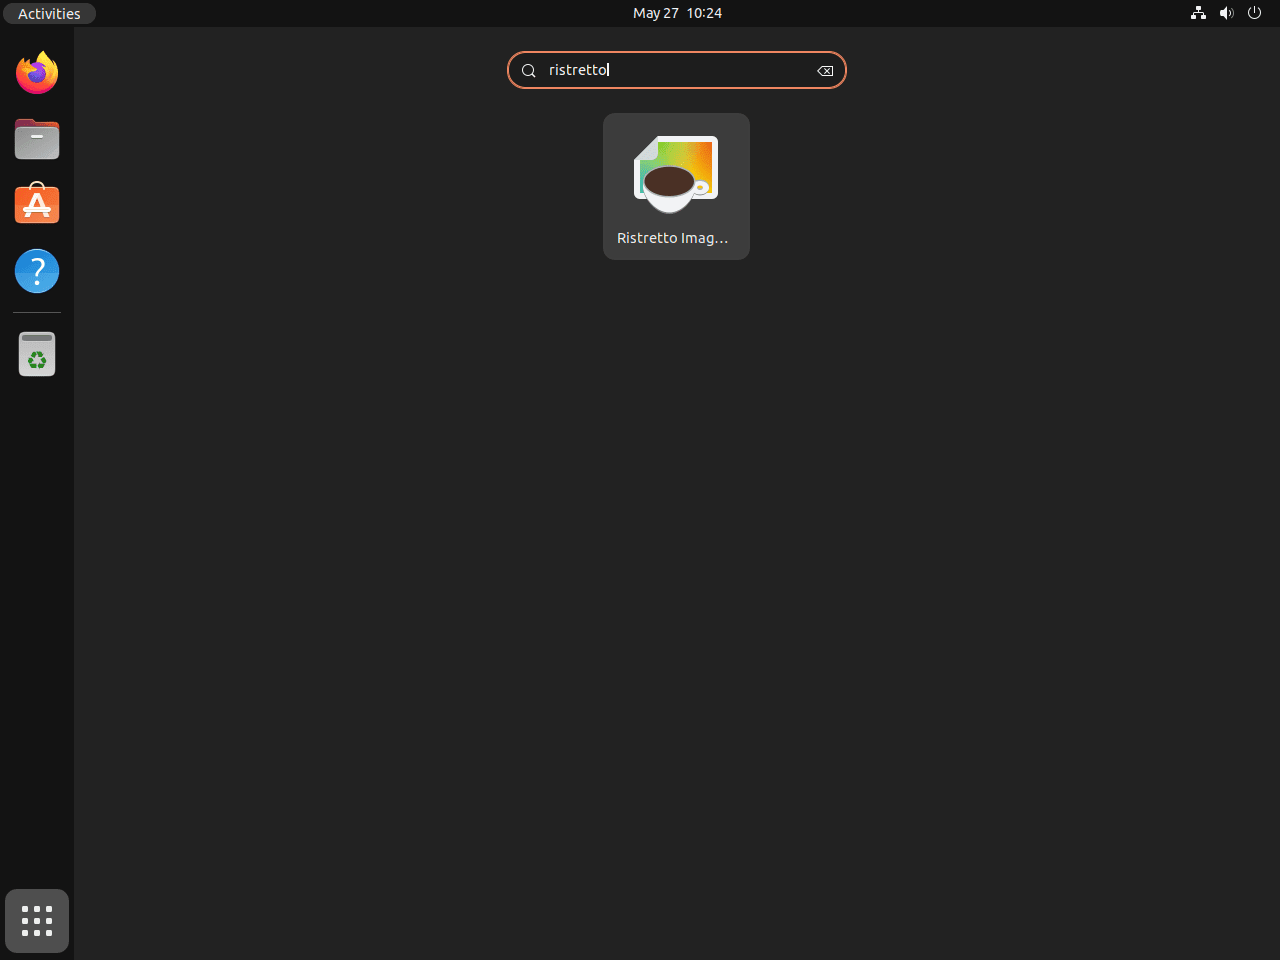 Launching Ristretto Image Viewer from the application icon on Ubuntu.